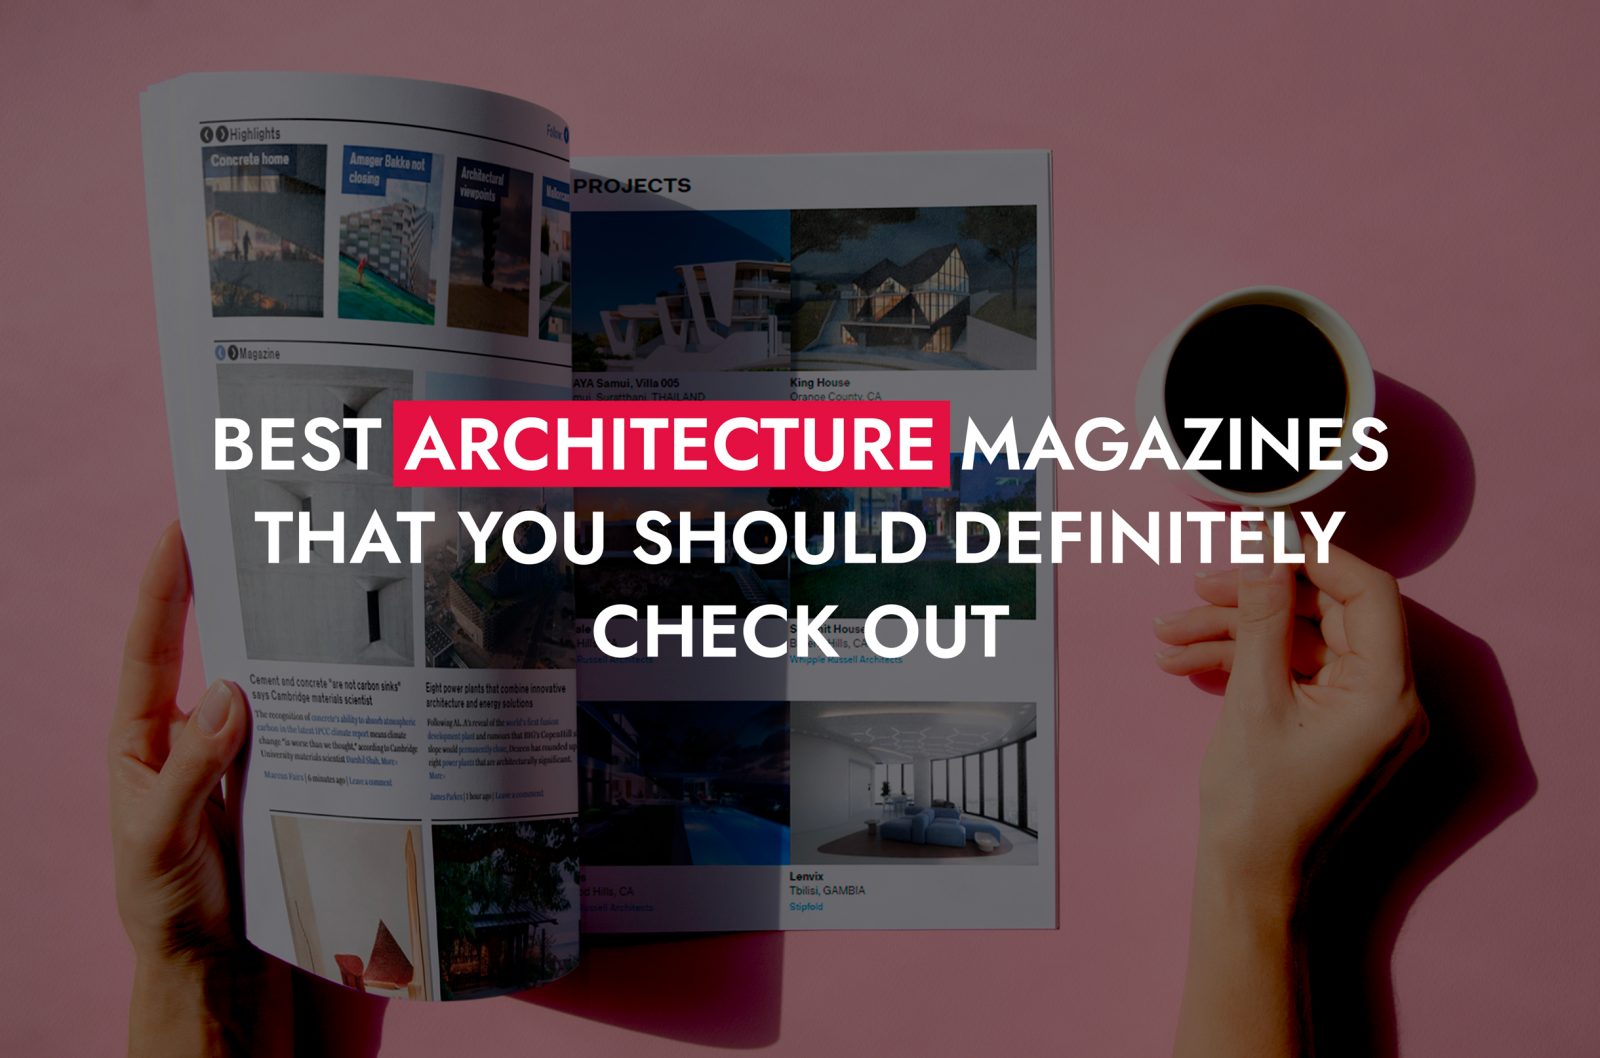 Best Architecture Magazines That You Should Definitely Check Out